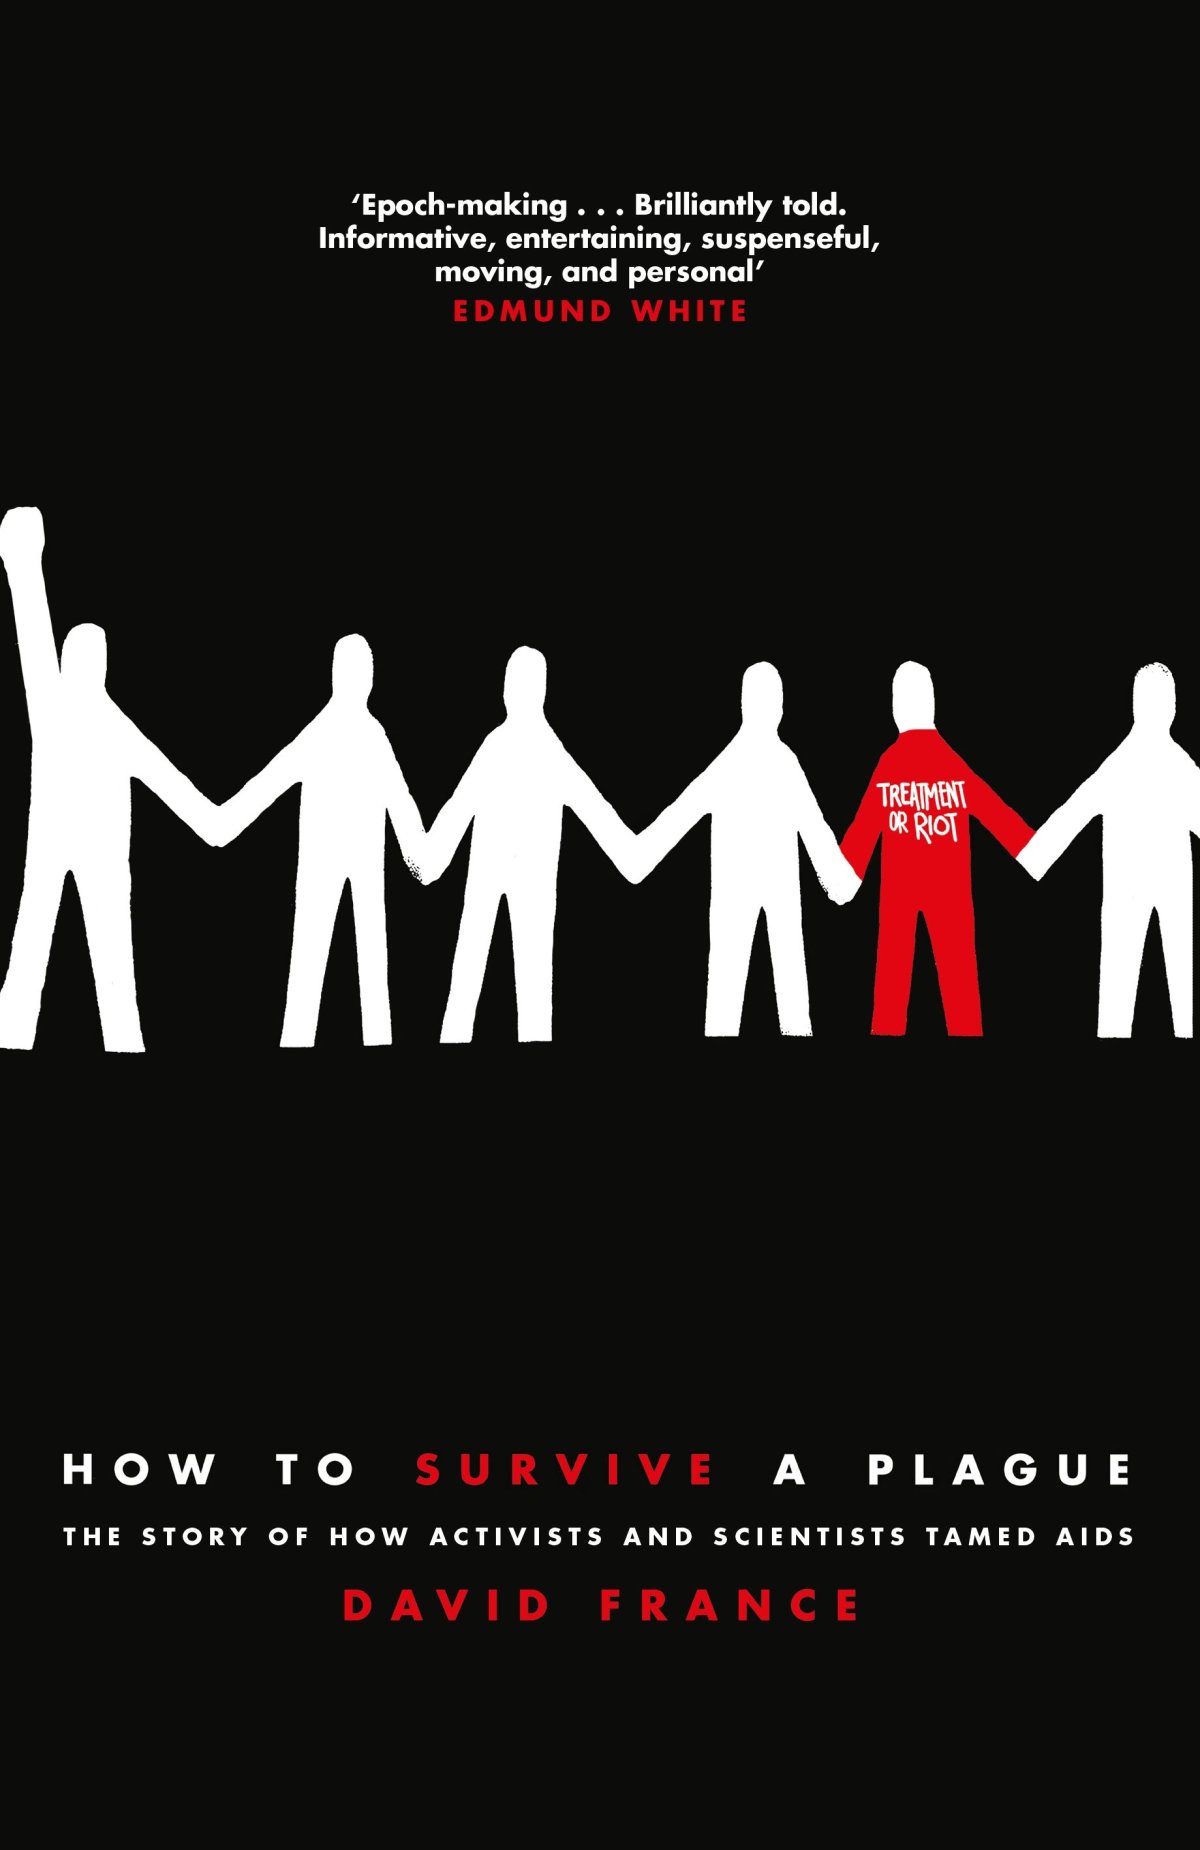 The Story of How Activists and Scientists Tamed AIDS